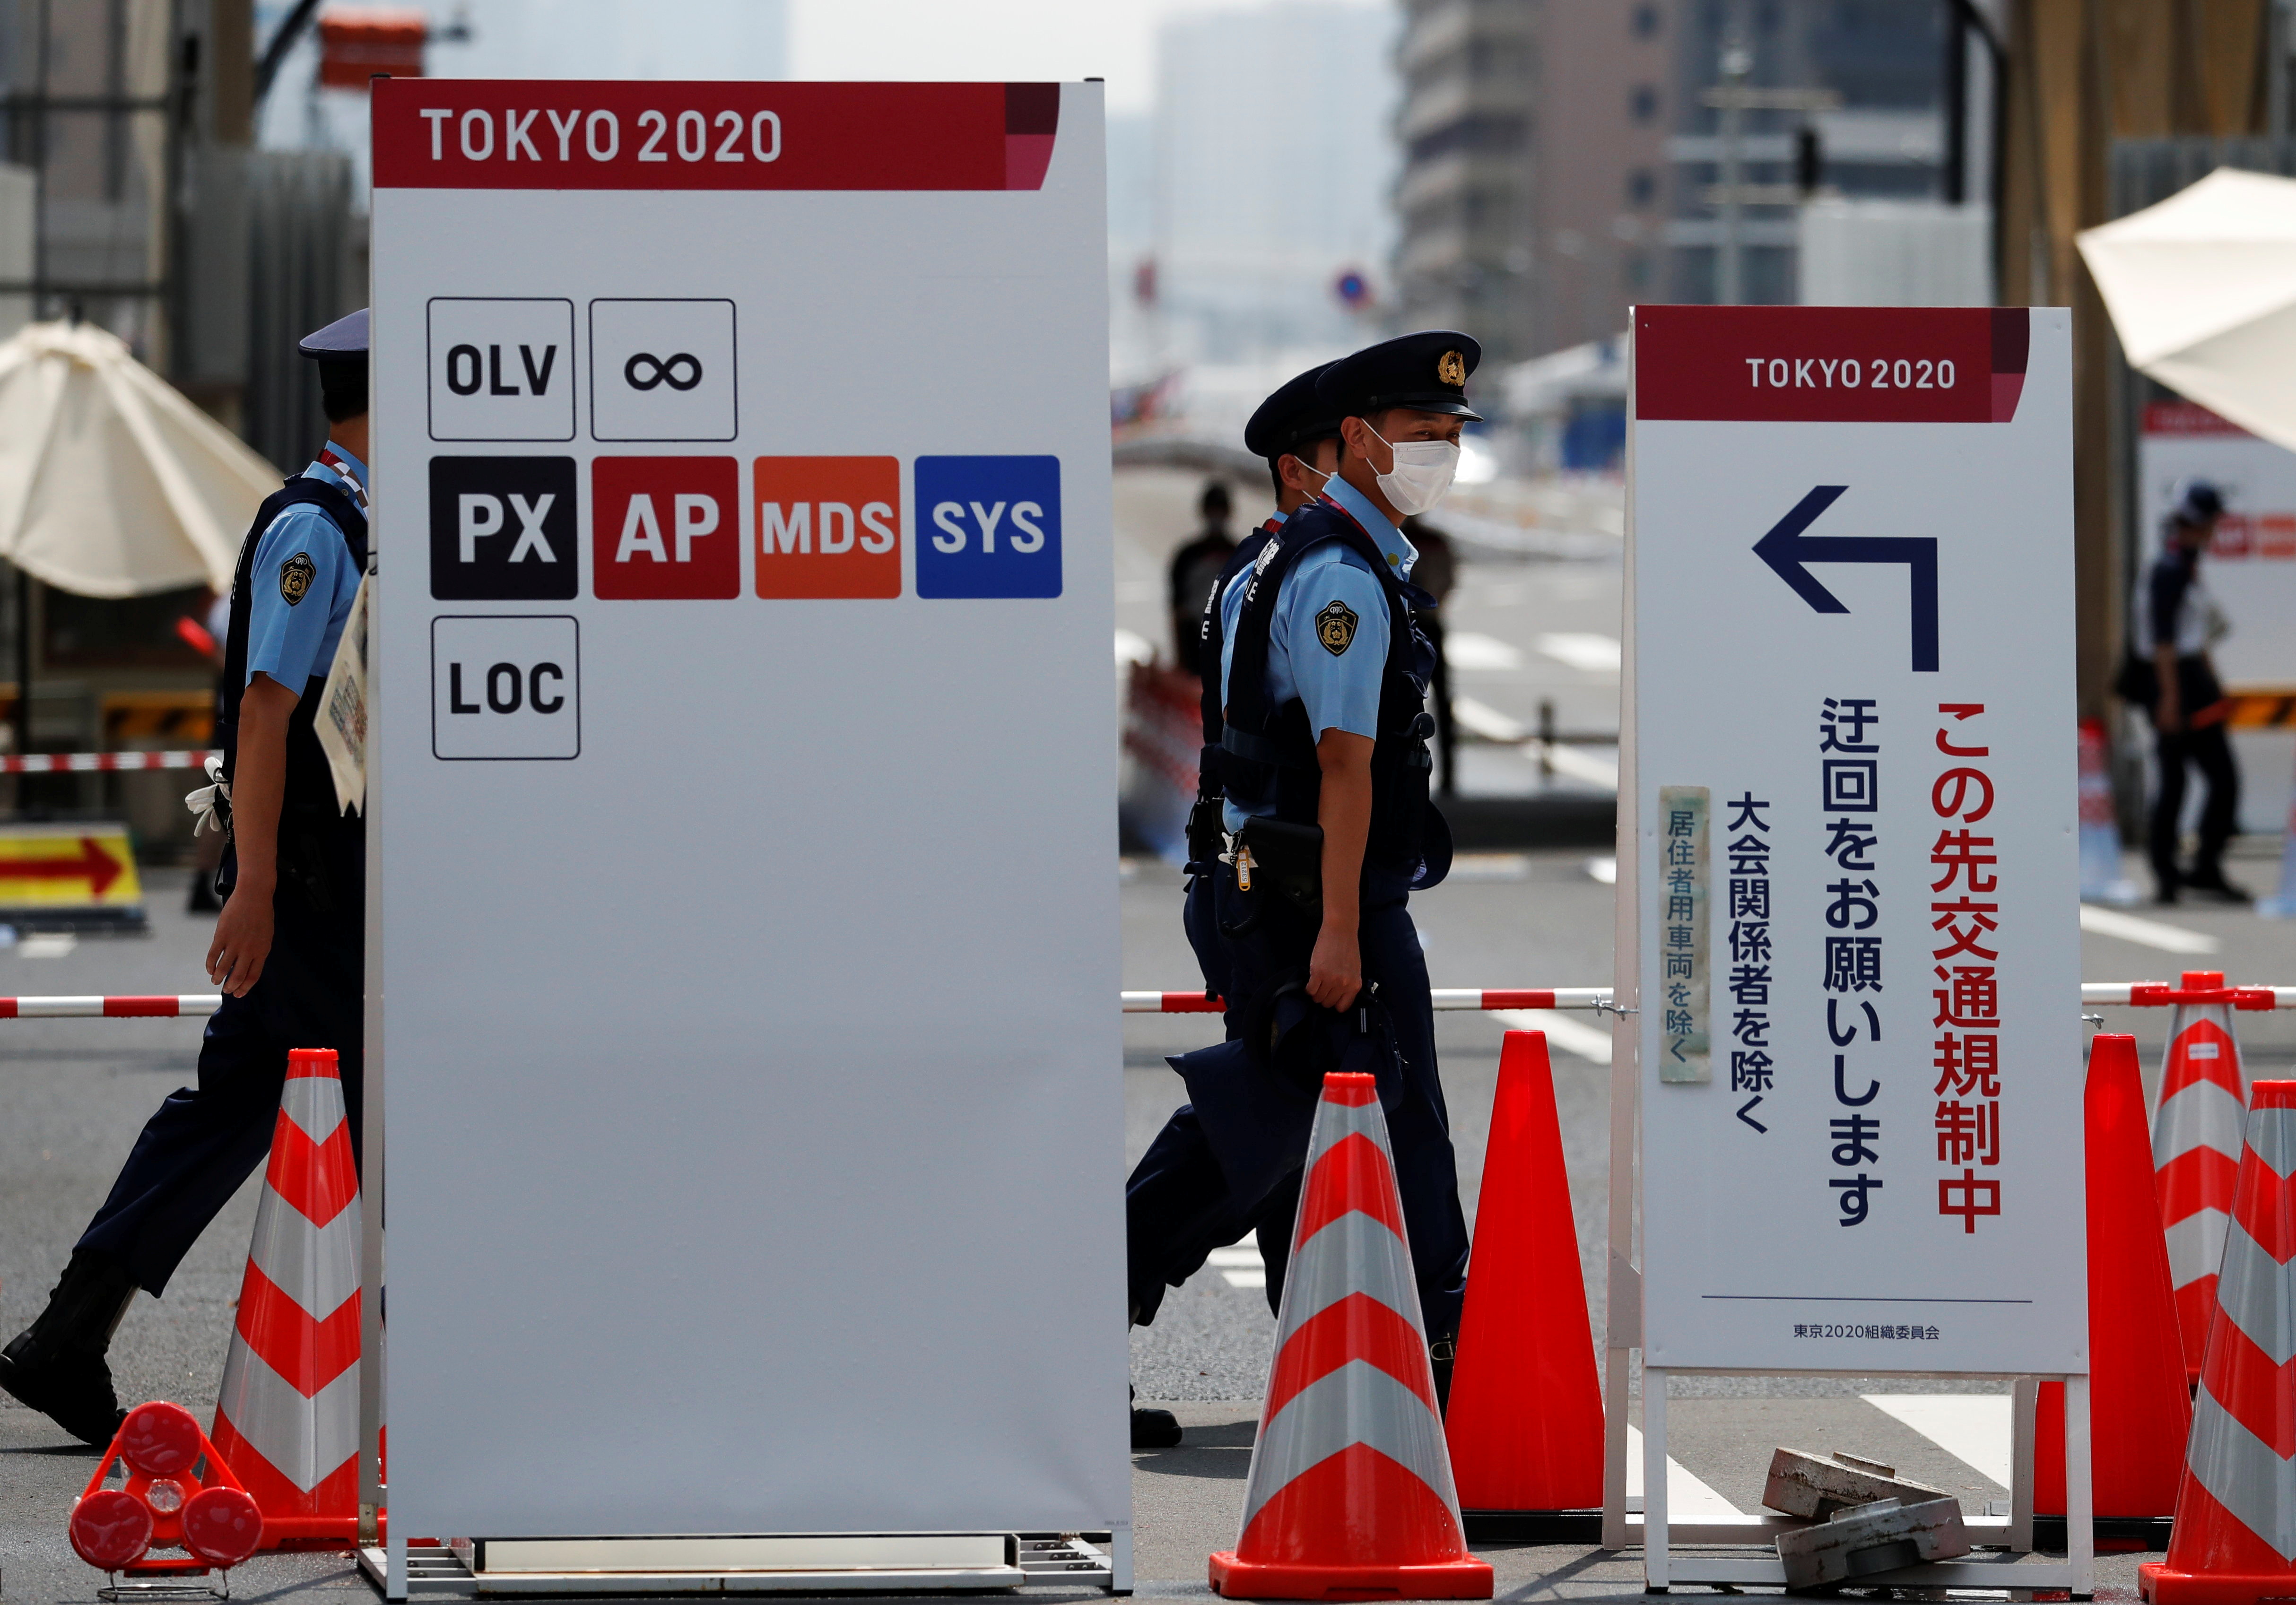 Police officers patrol at the entrance of the Athletes Village ahead of Tokyo 2020 Olympic Games in Tokyo